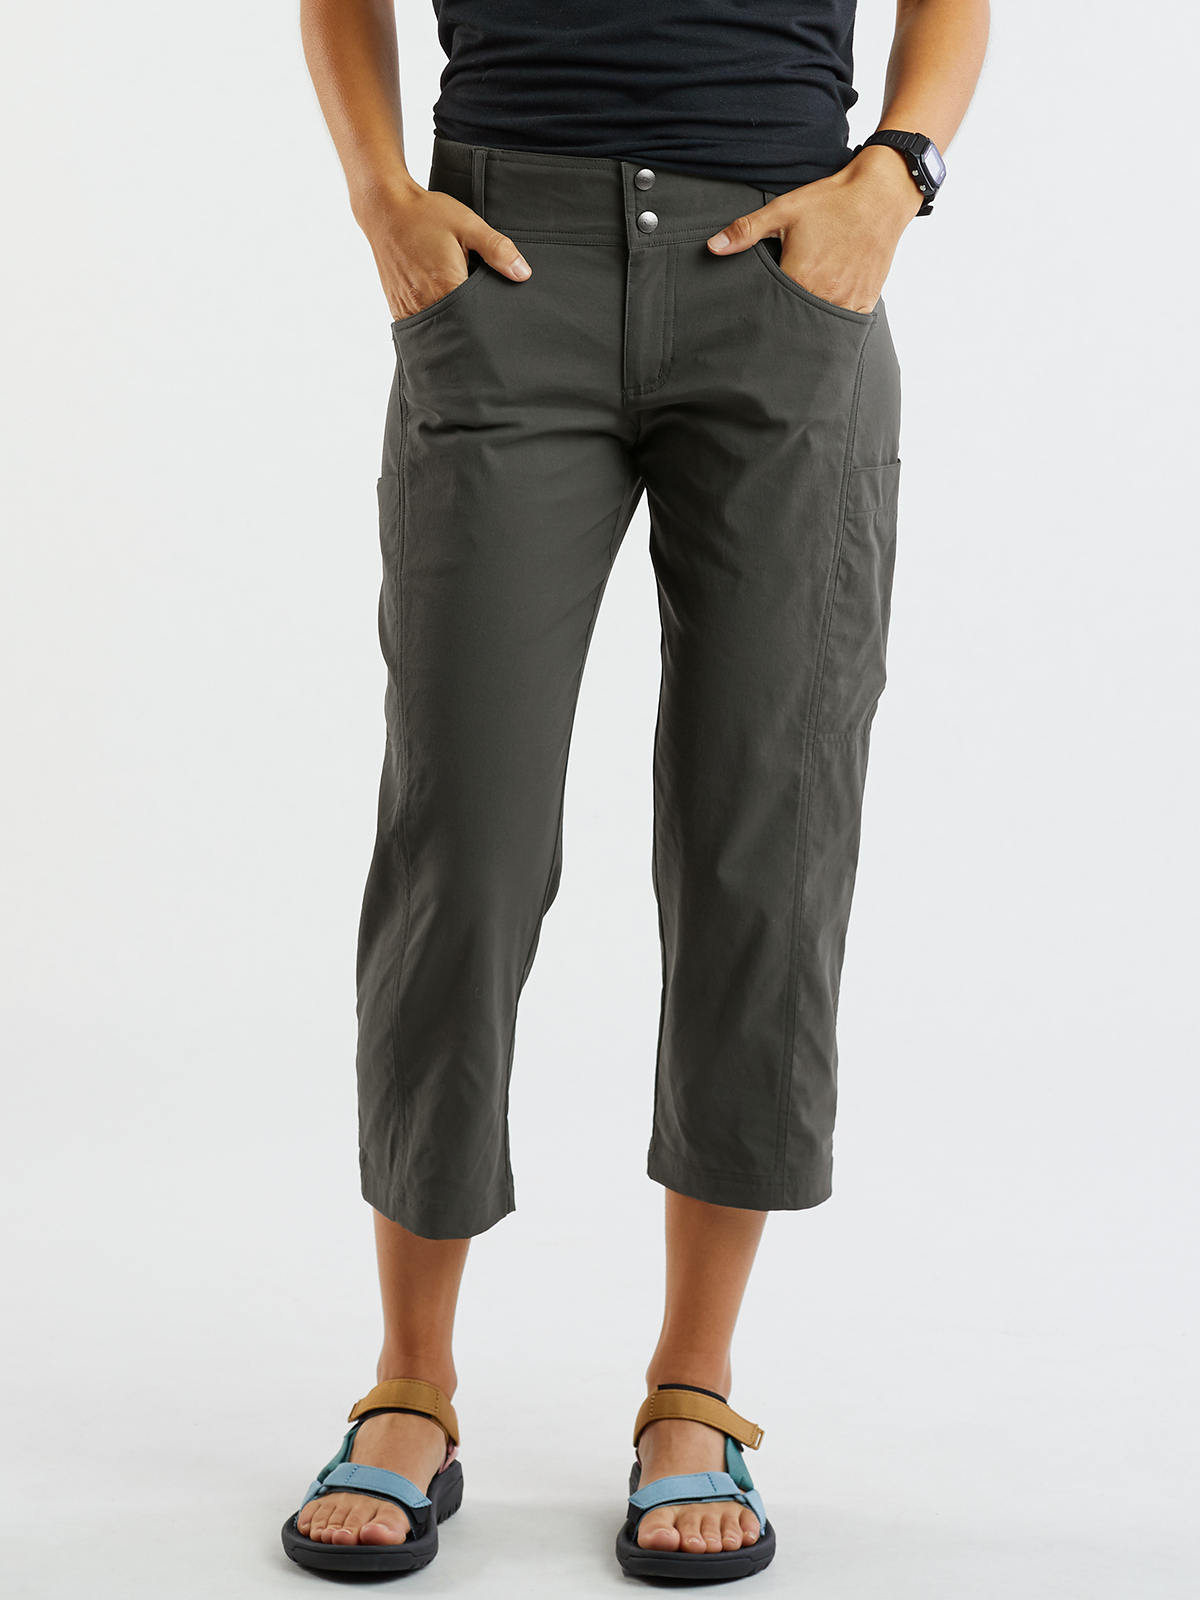 Women's Hiking Capris: Recycled Clamber | Title Nine